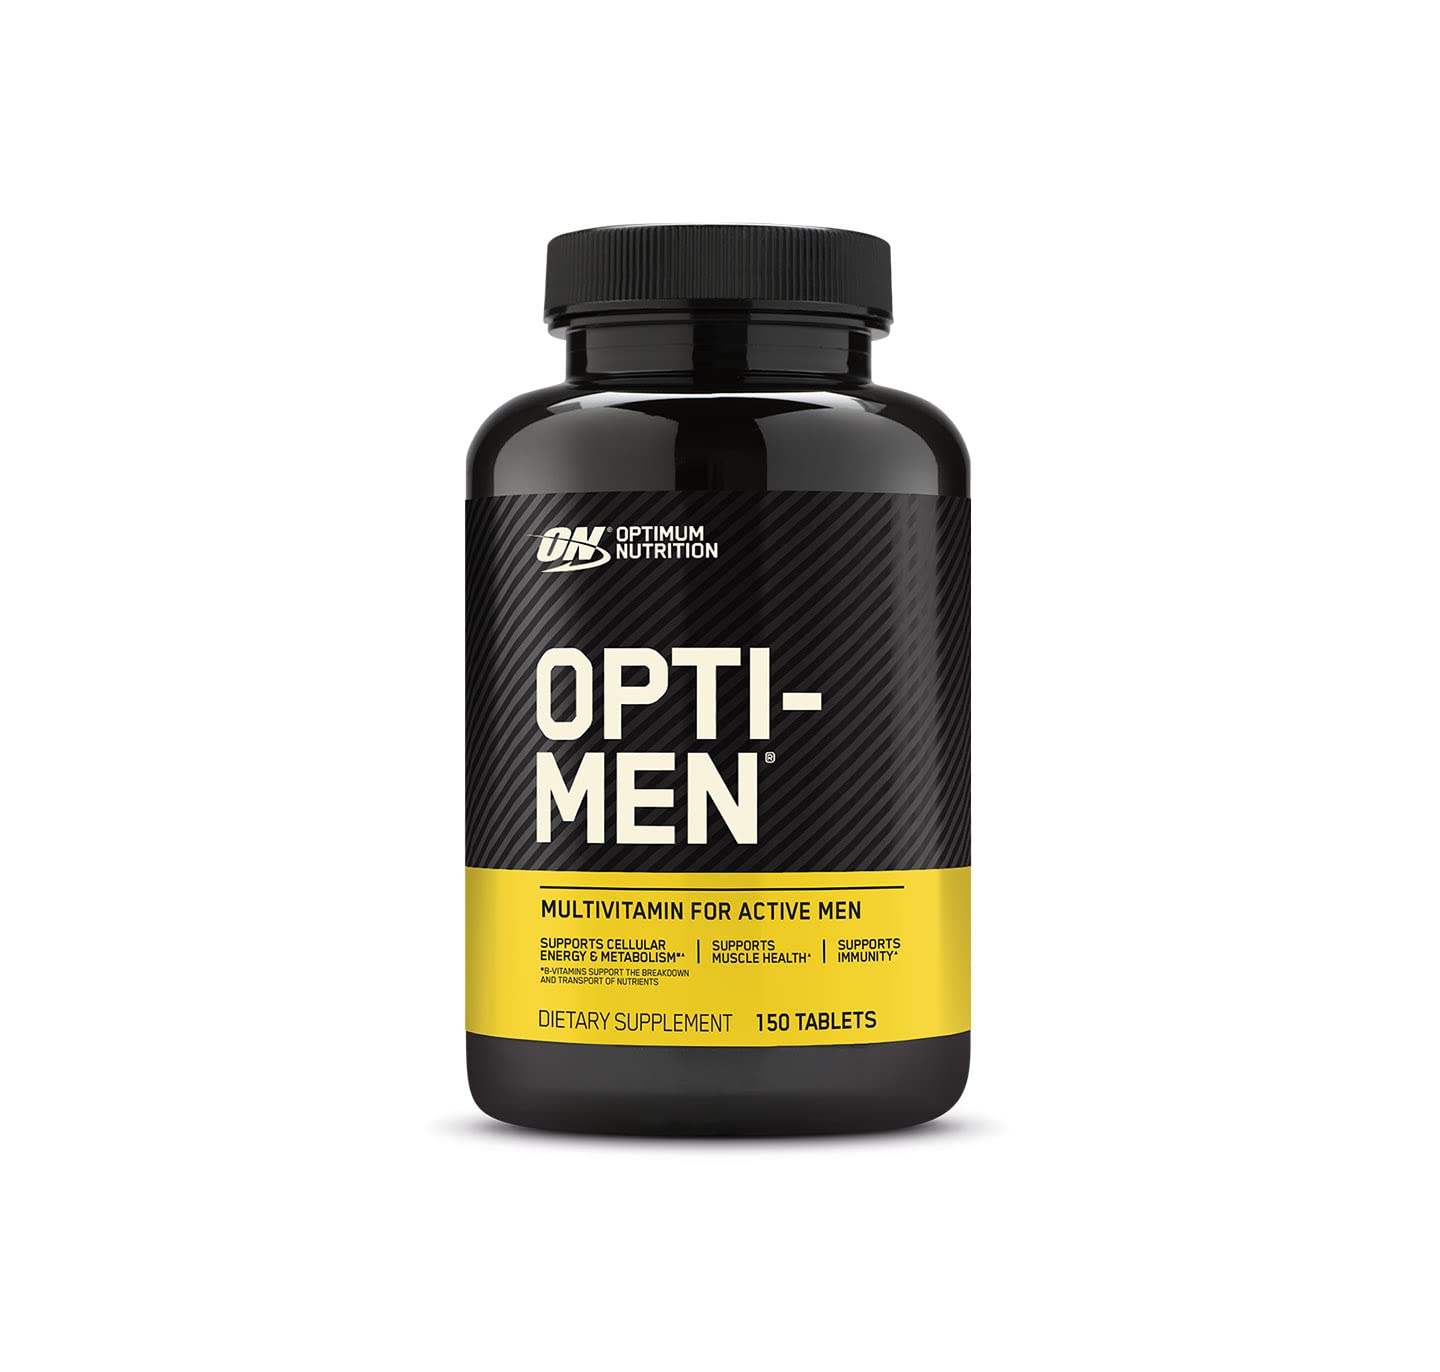 Optimum Nutrition Opti-Men and Women, Vitamin C, Zinc and Vitamin D, E, B12 for Immune Support Mens Daily Multivitamin Supplement, 150 Count (Packaging May Vary)